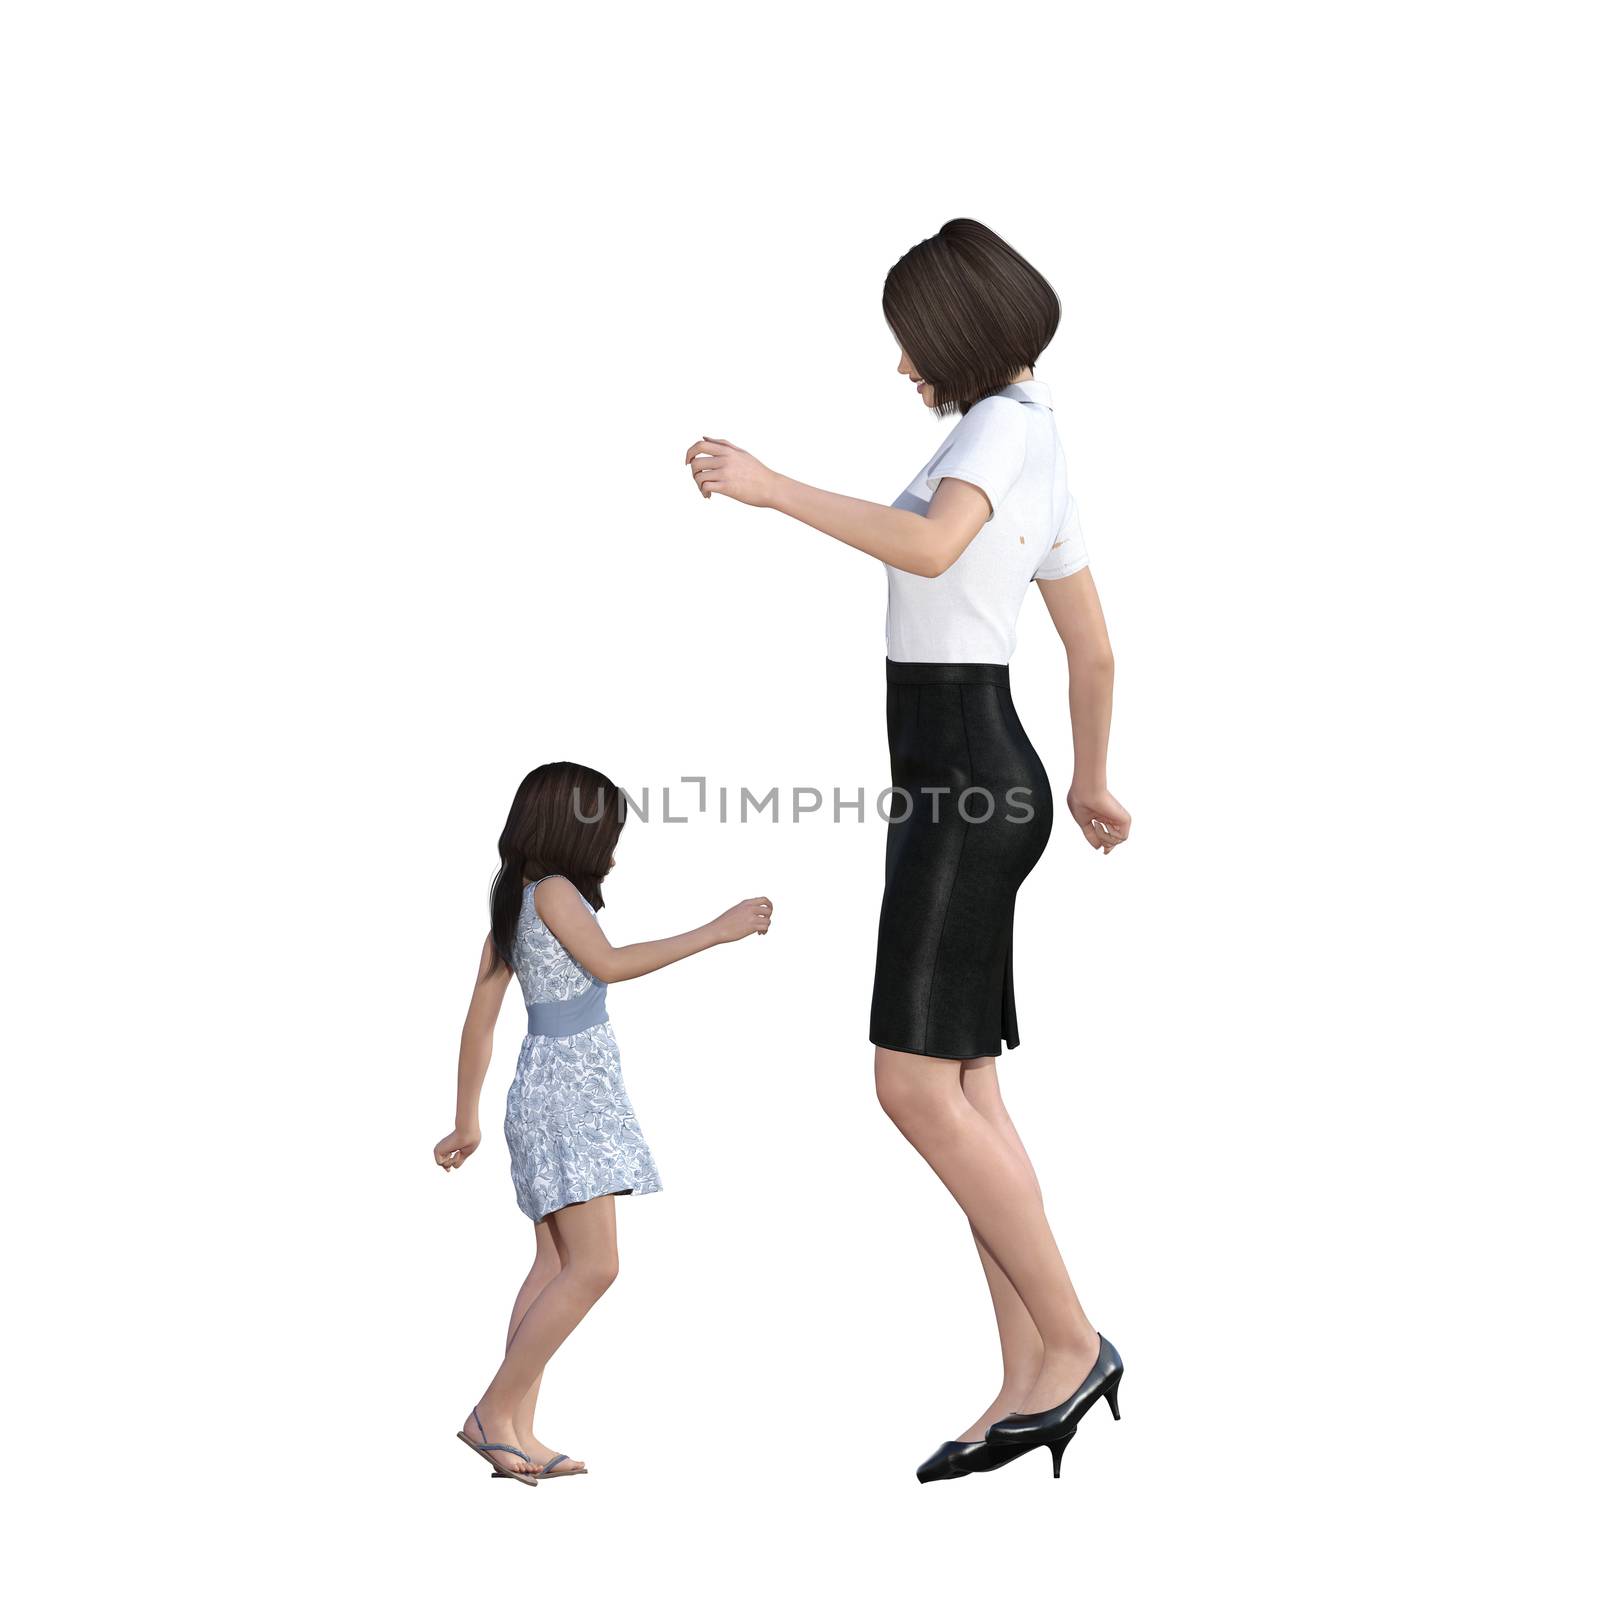 Mother Daughter Interaction of Dancing Together by kentoh